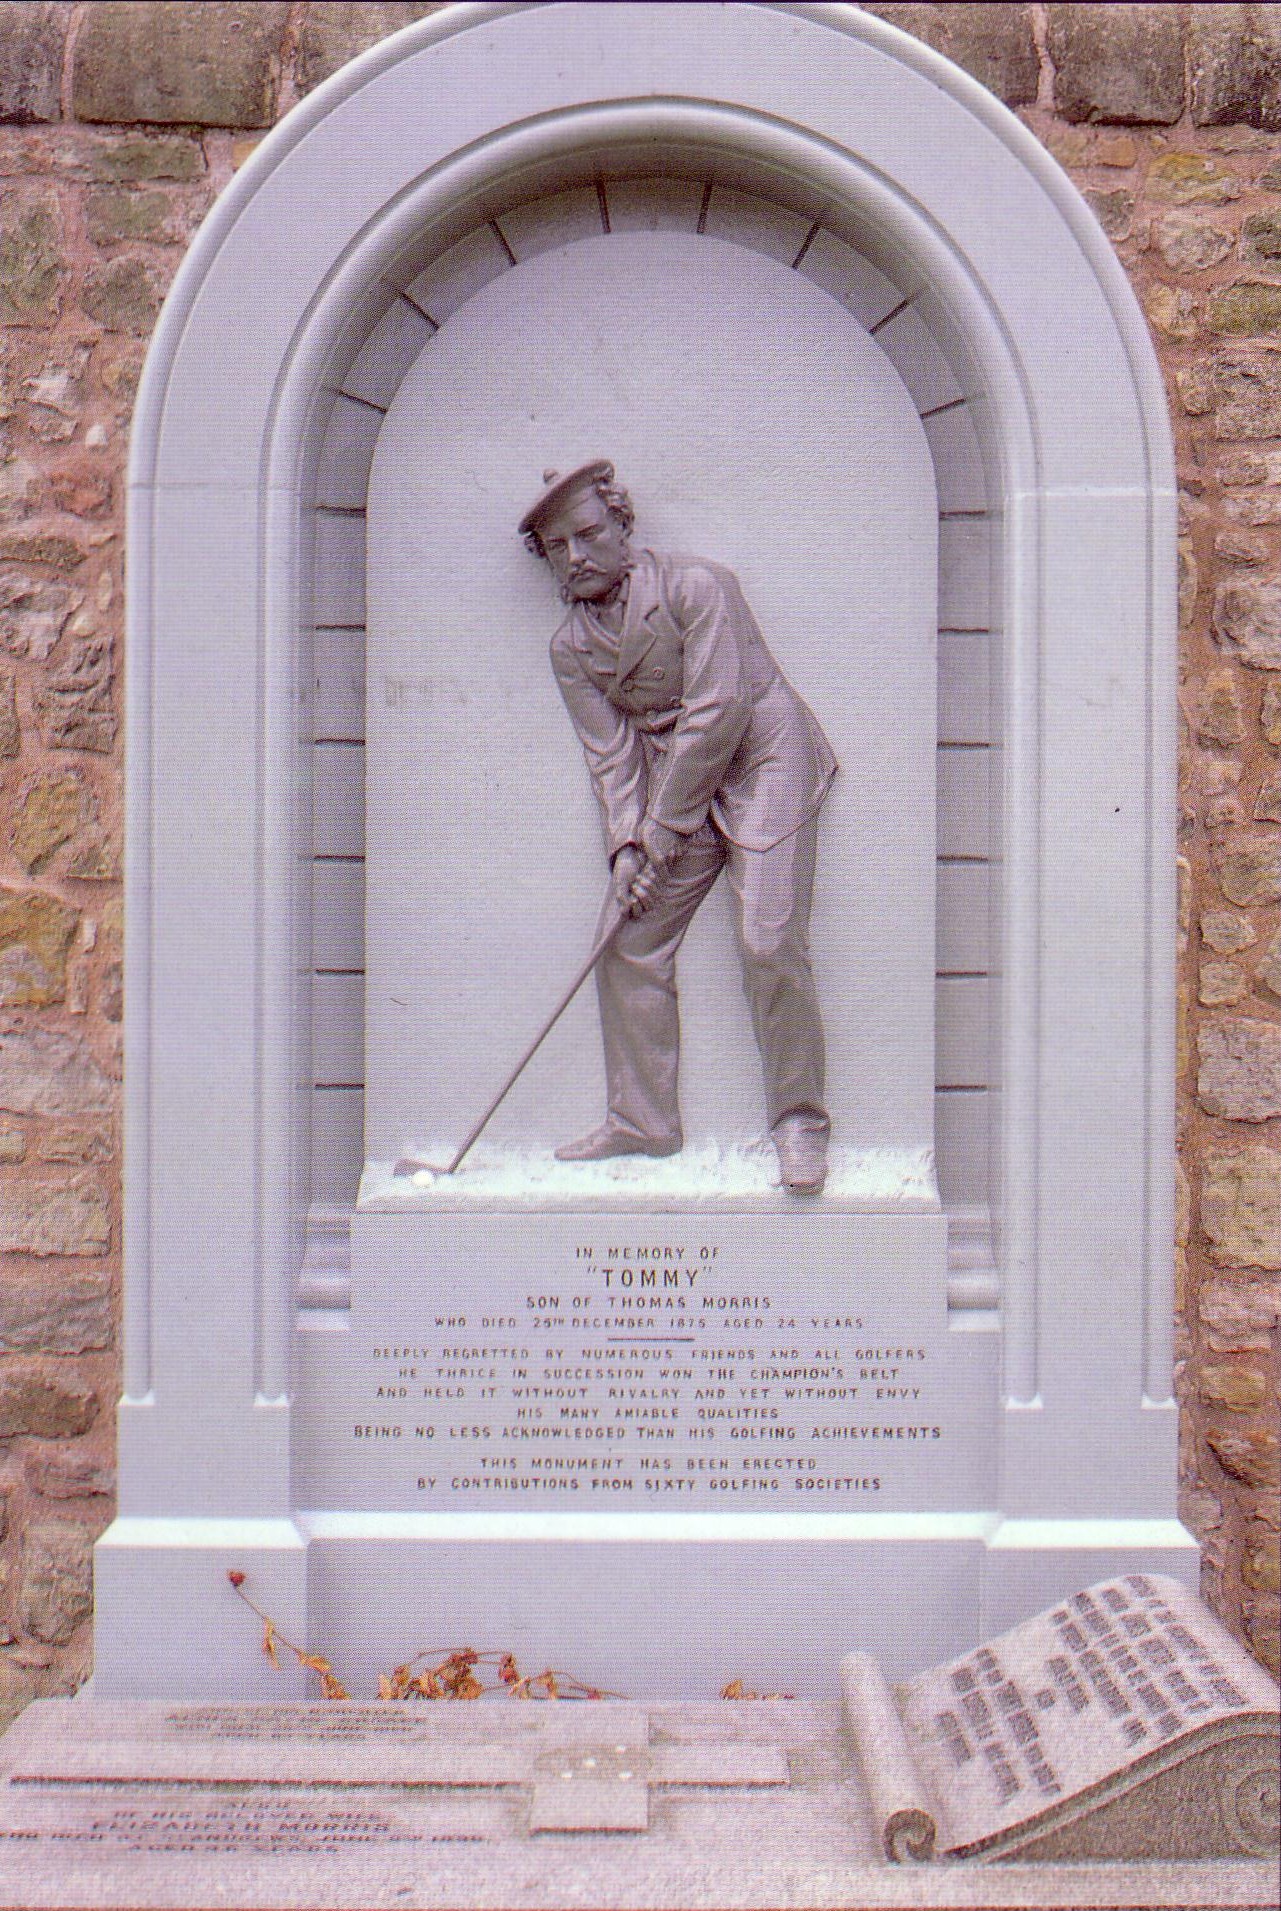 A photo of the Tommy Morris Memorial loacted in the St. Andrews cemetery